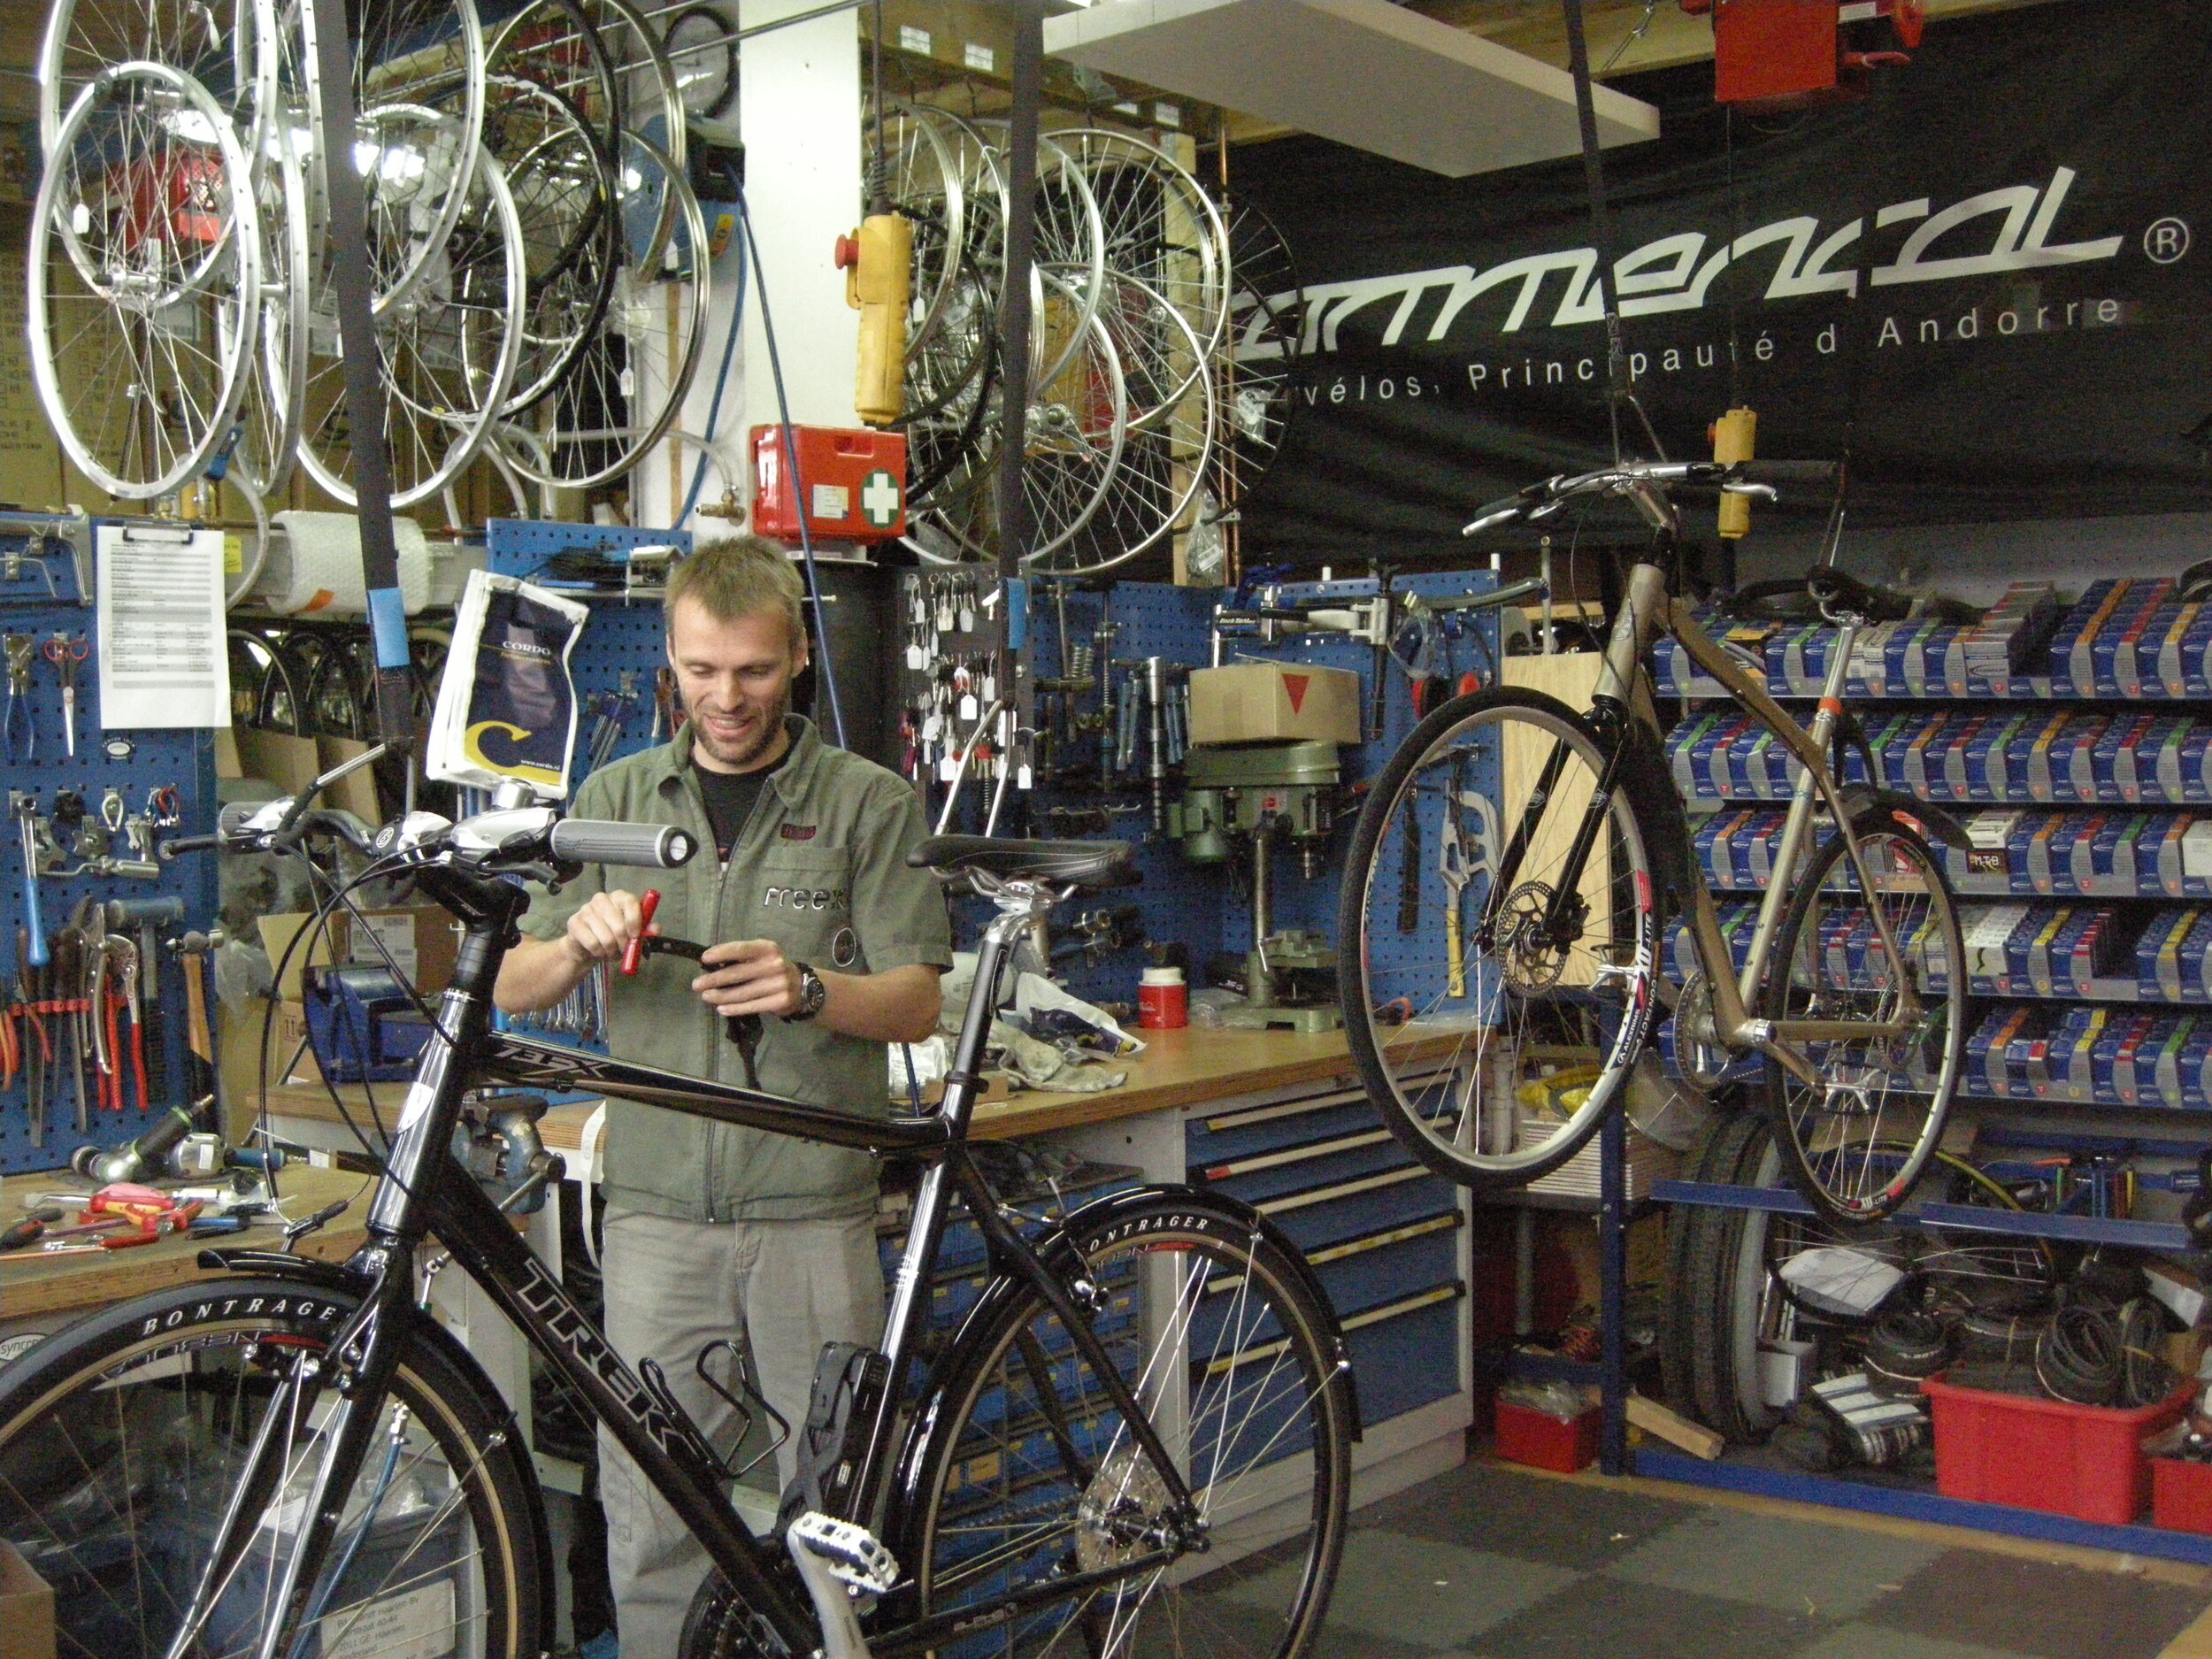  I think in Haarlem, NL, this mechanic took a look at the lubricant than had been oozing out of my bike's headset for days.   